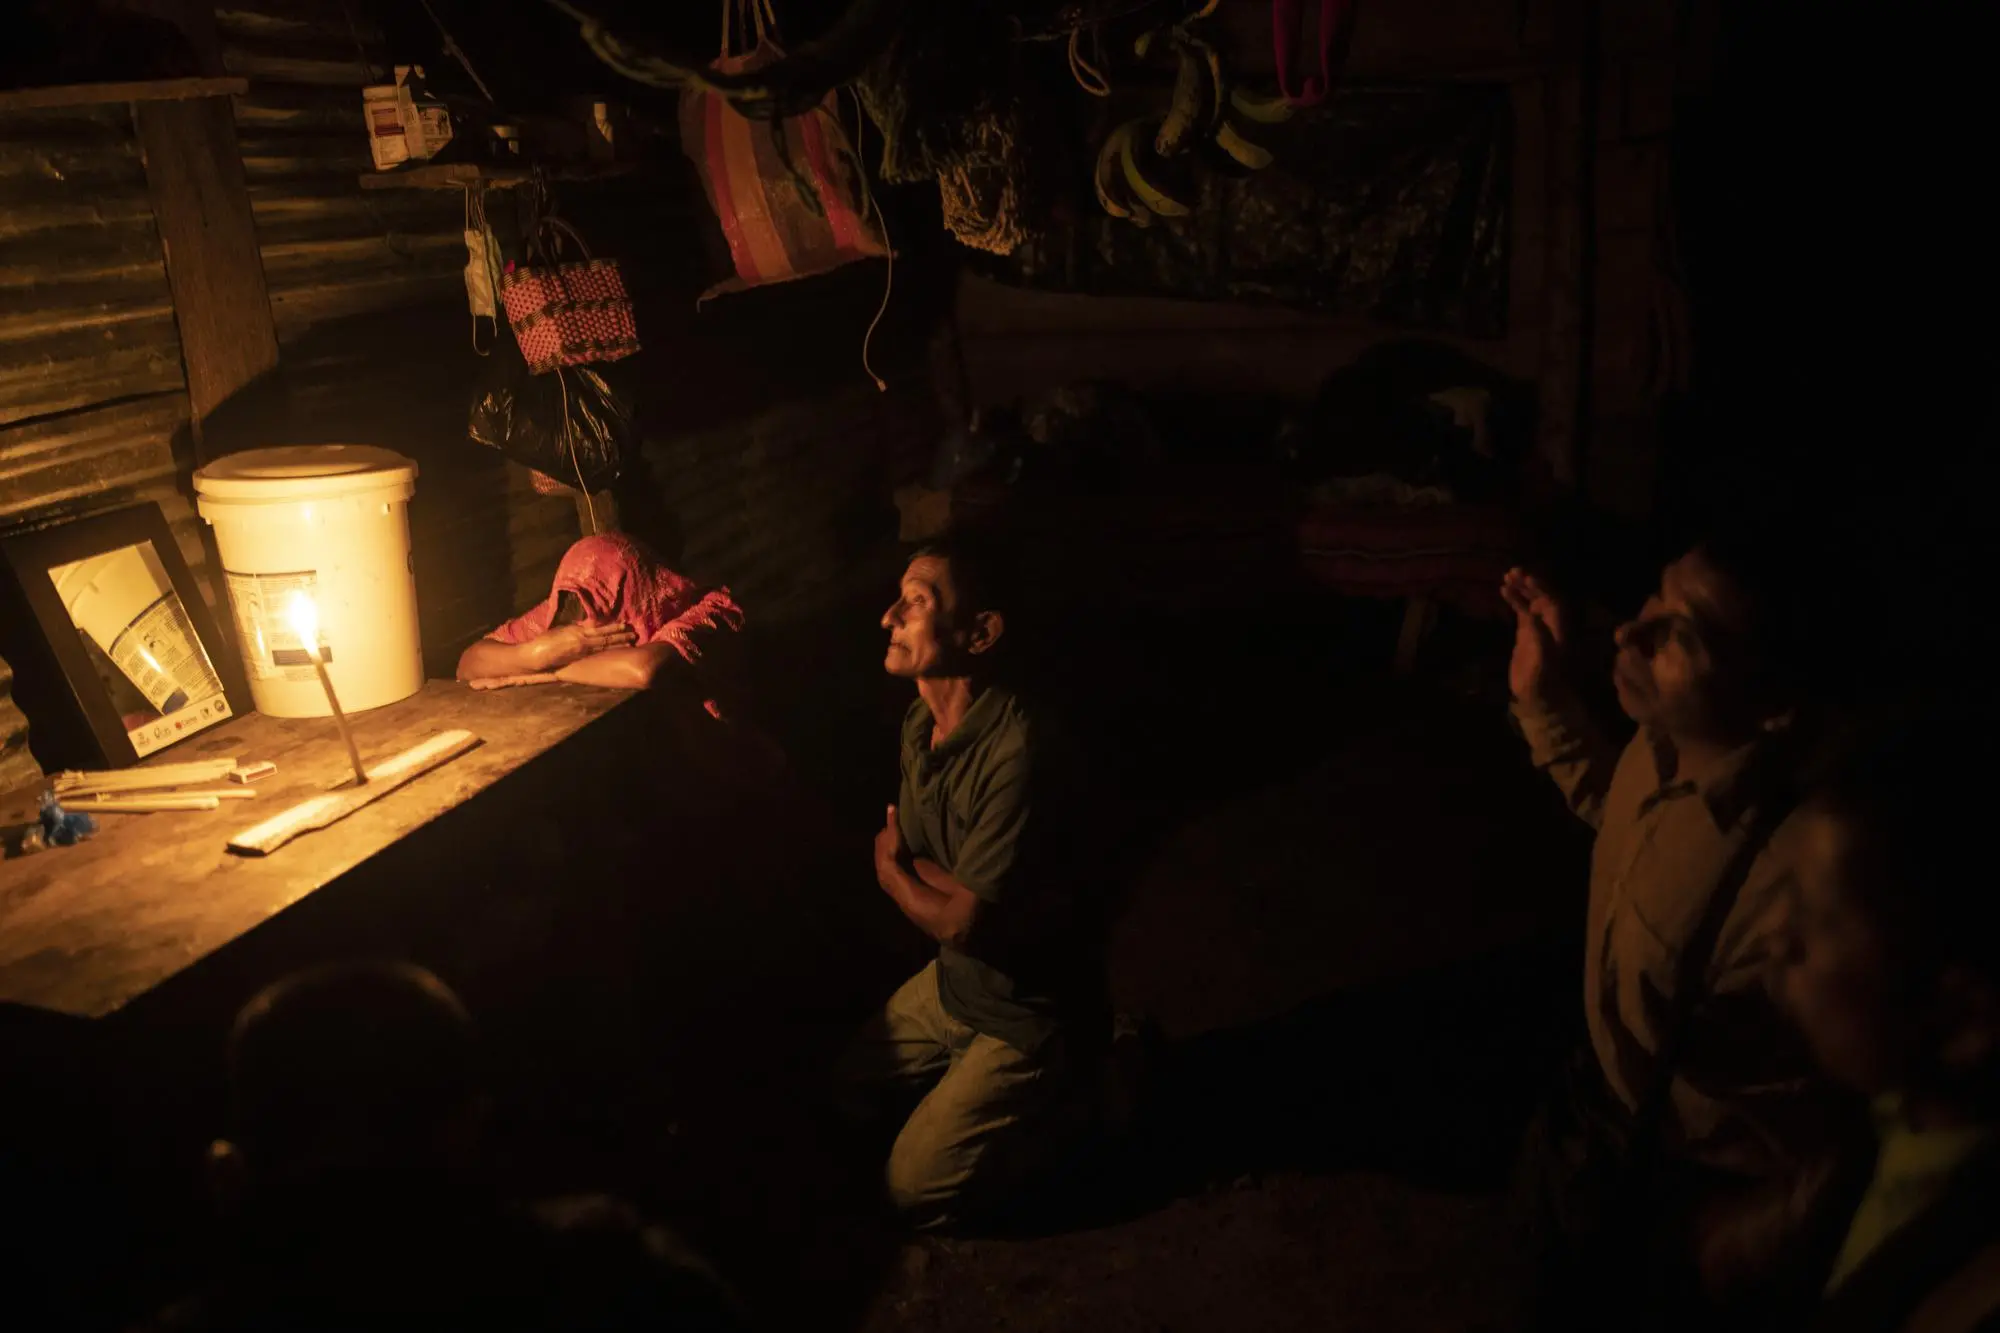 A group of Guatemalans pray in front of a small candle